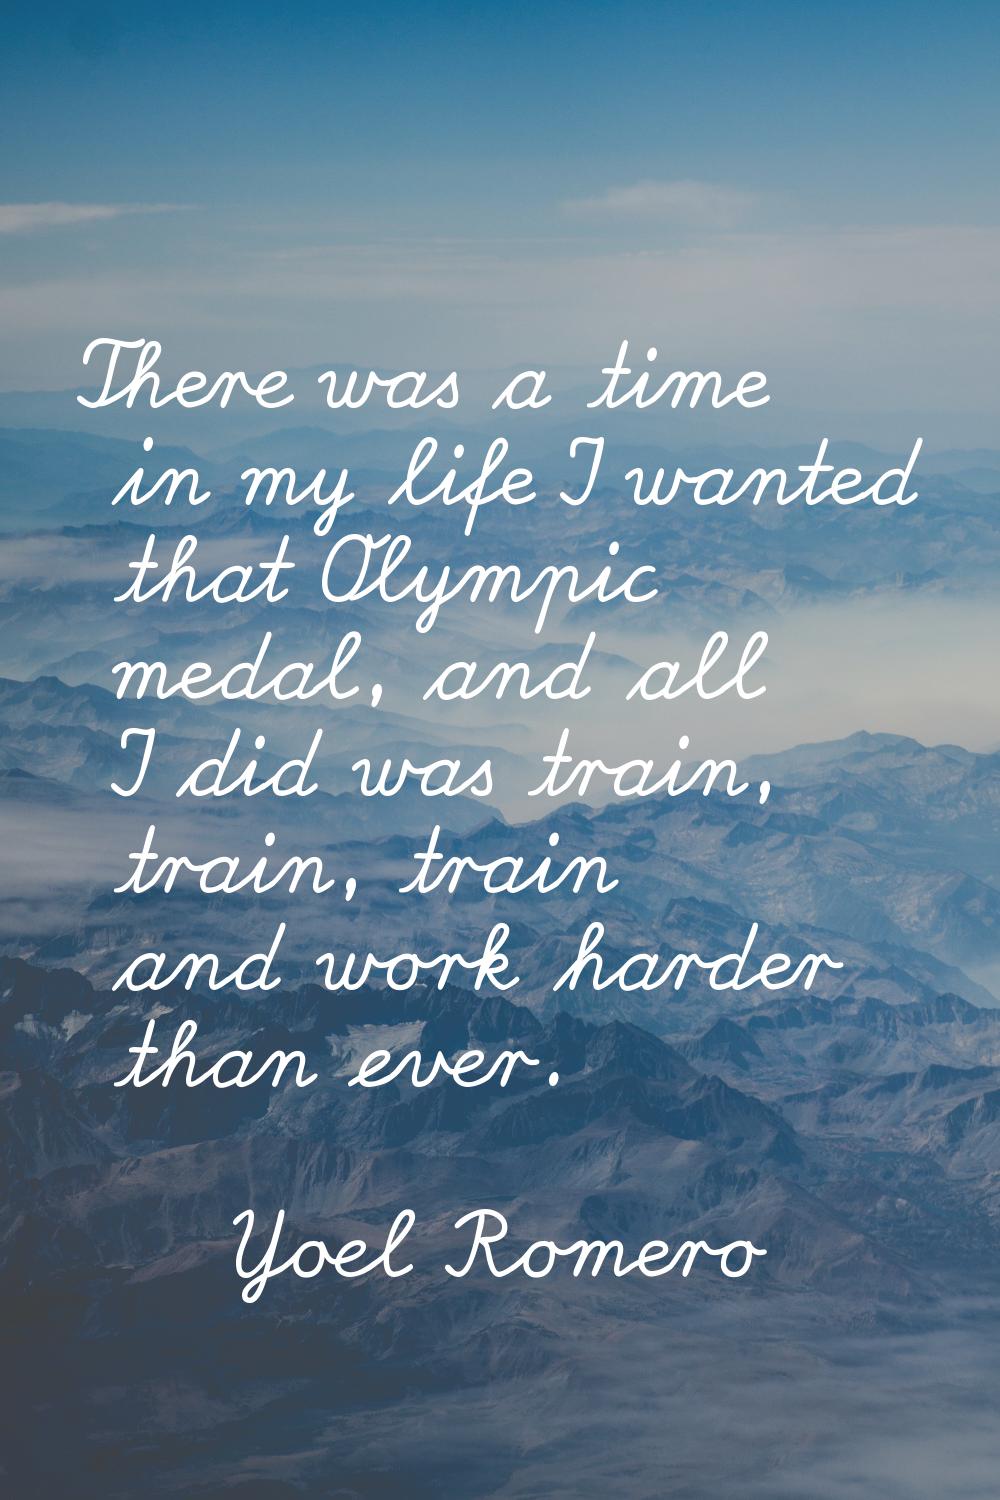 There was a time in my life I wanted that Olympic medal, and all I did was train, train, train and 